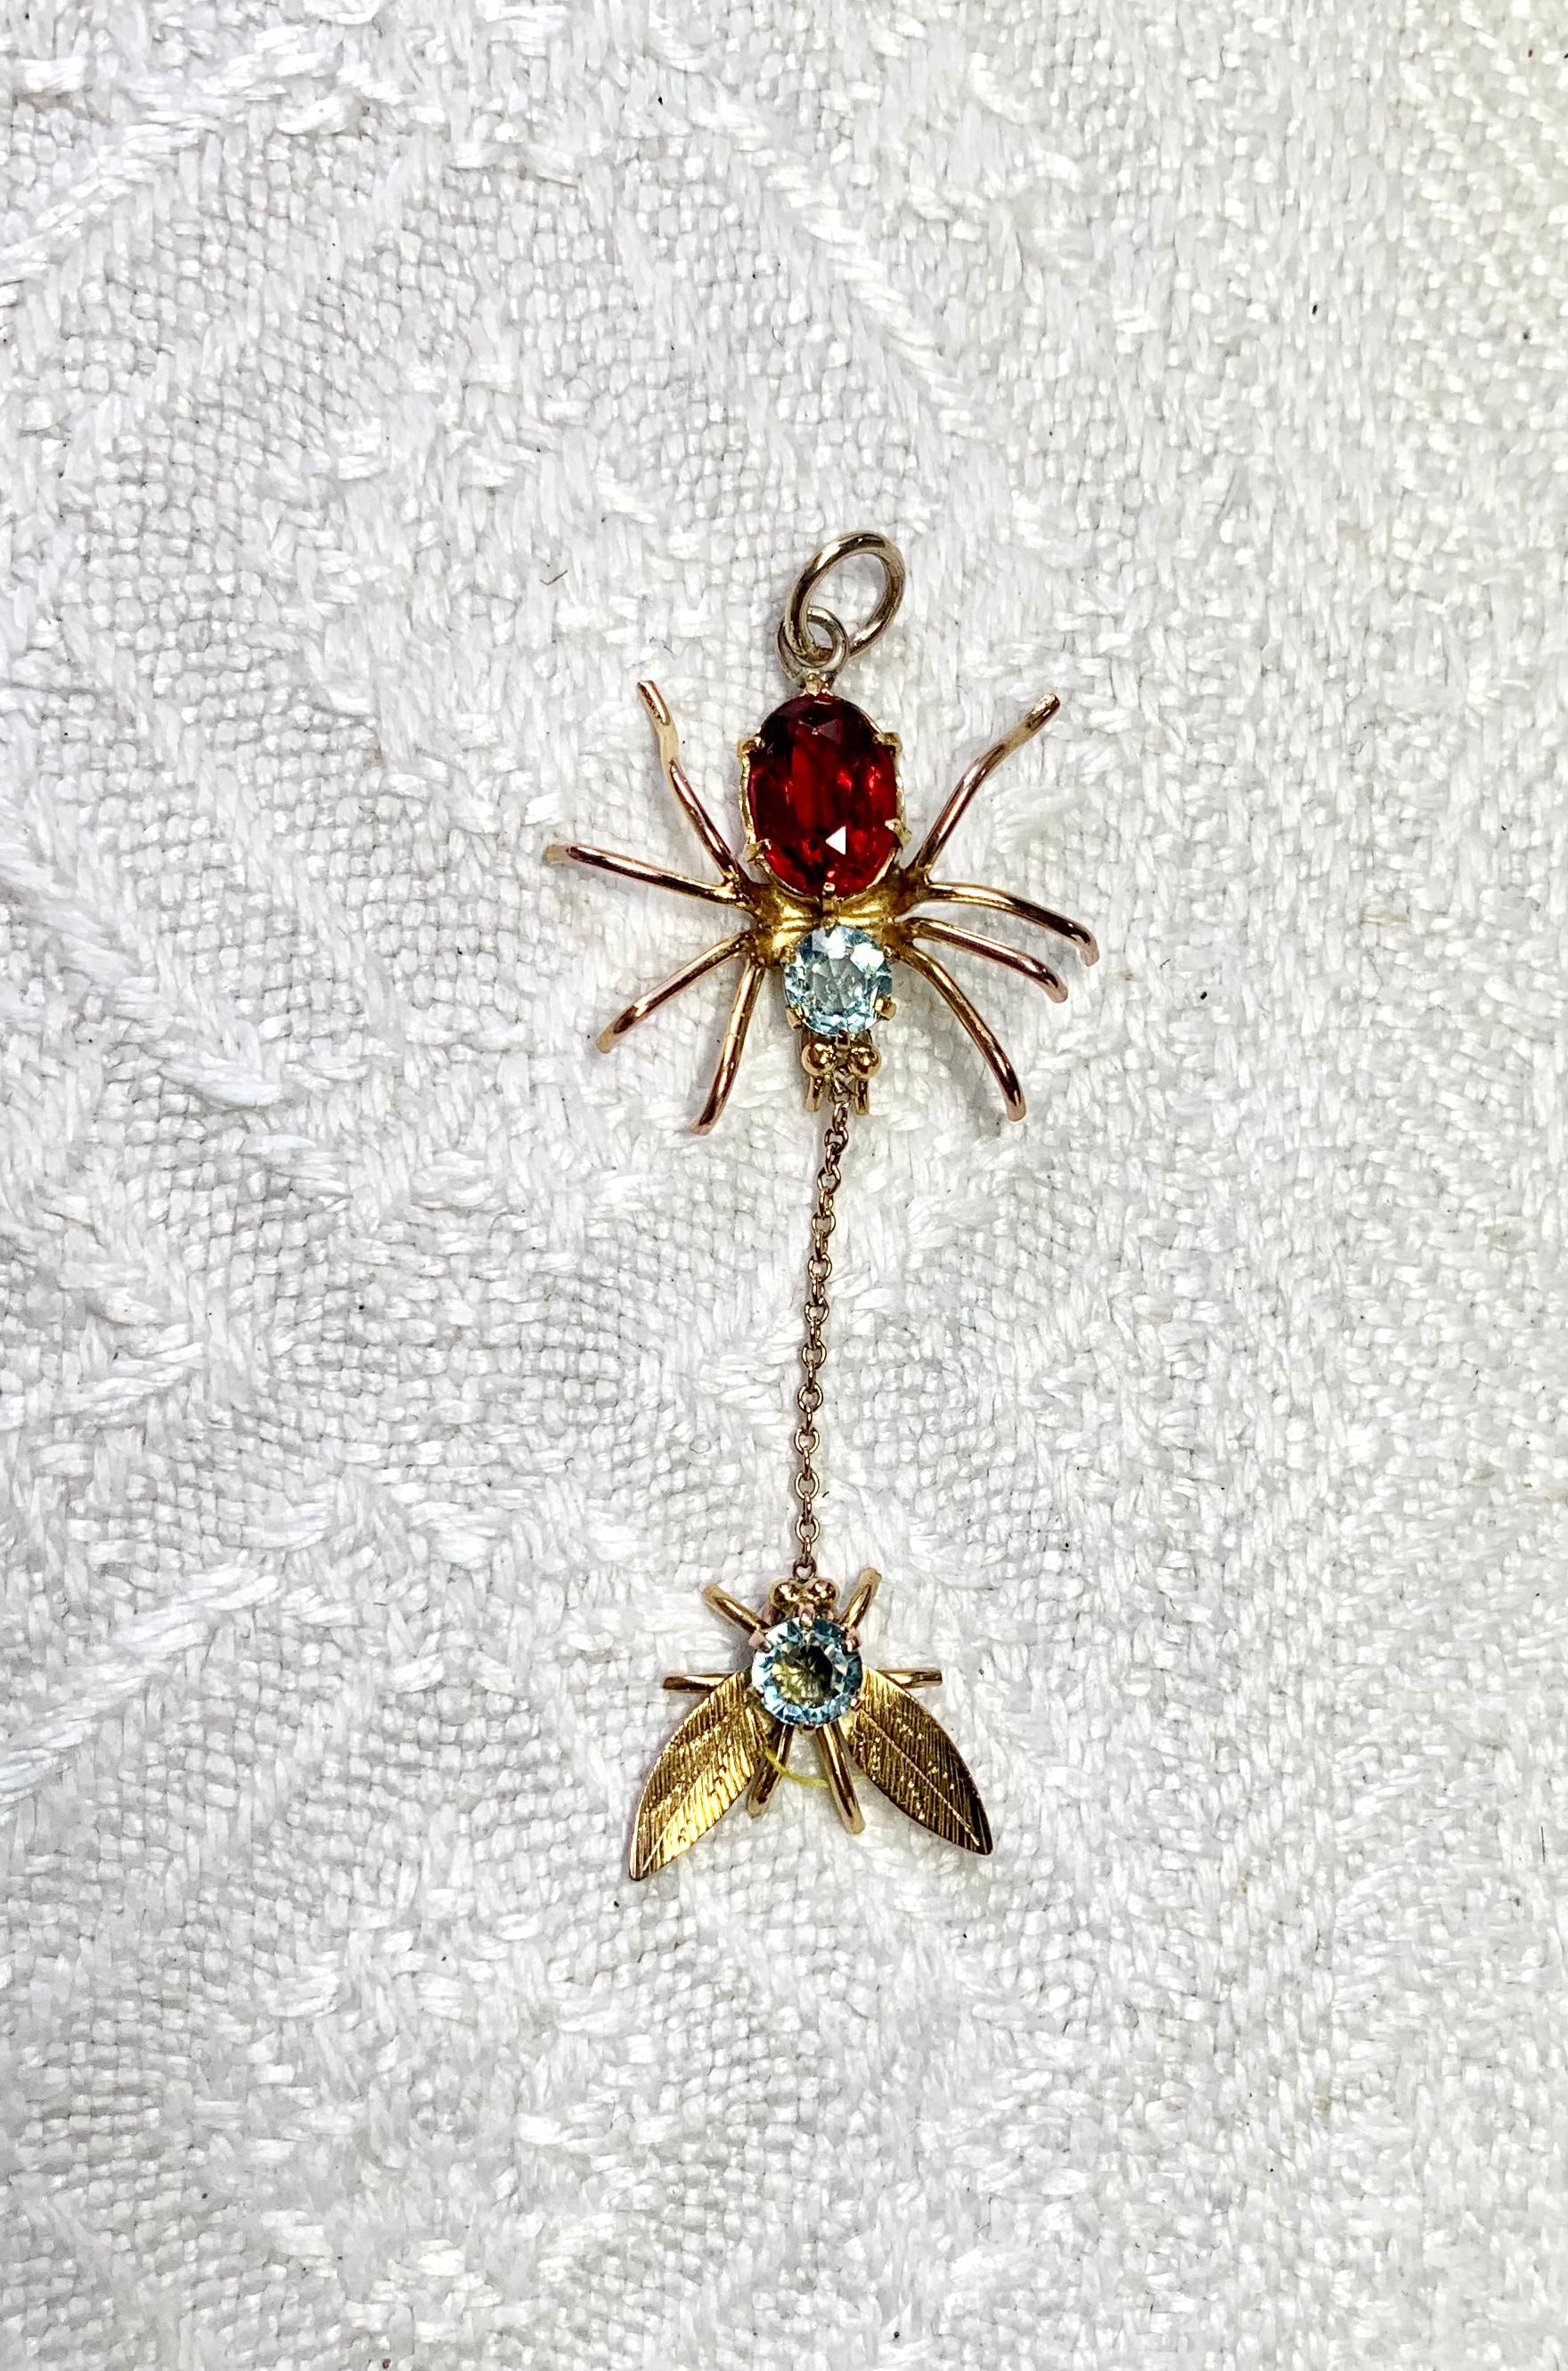 Women's Spider and Fly Insect Pendant Necklace Aquamarine Garnet Gold Antique Art Deco